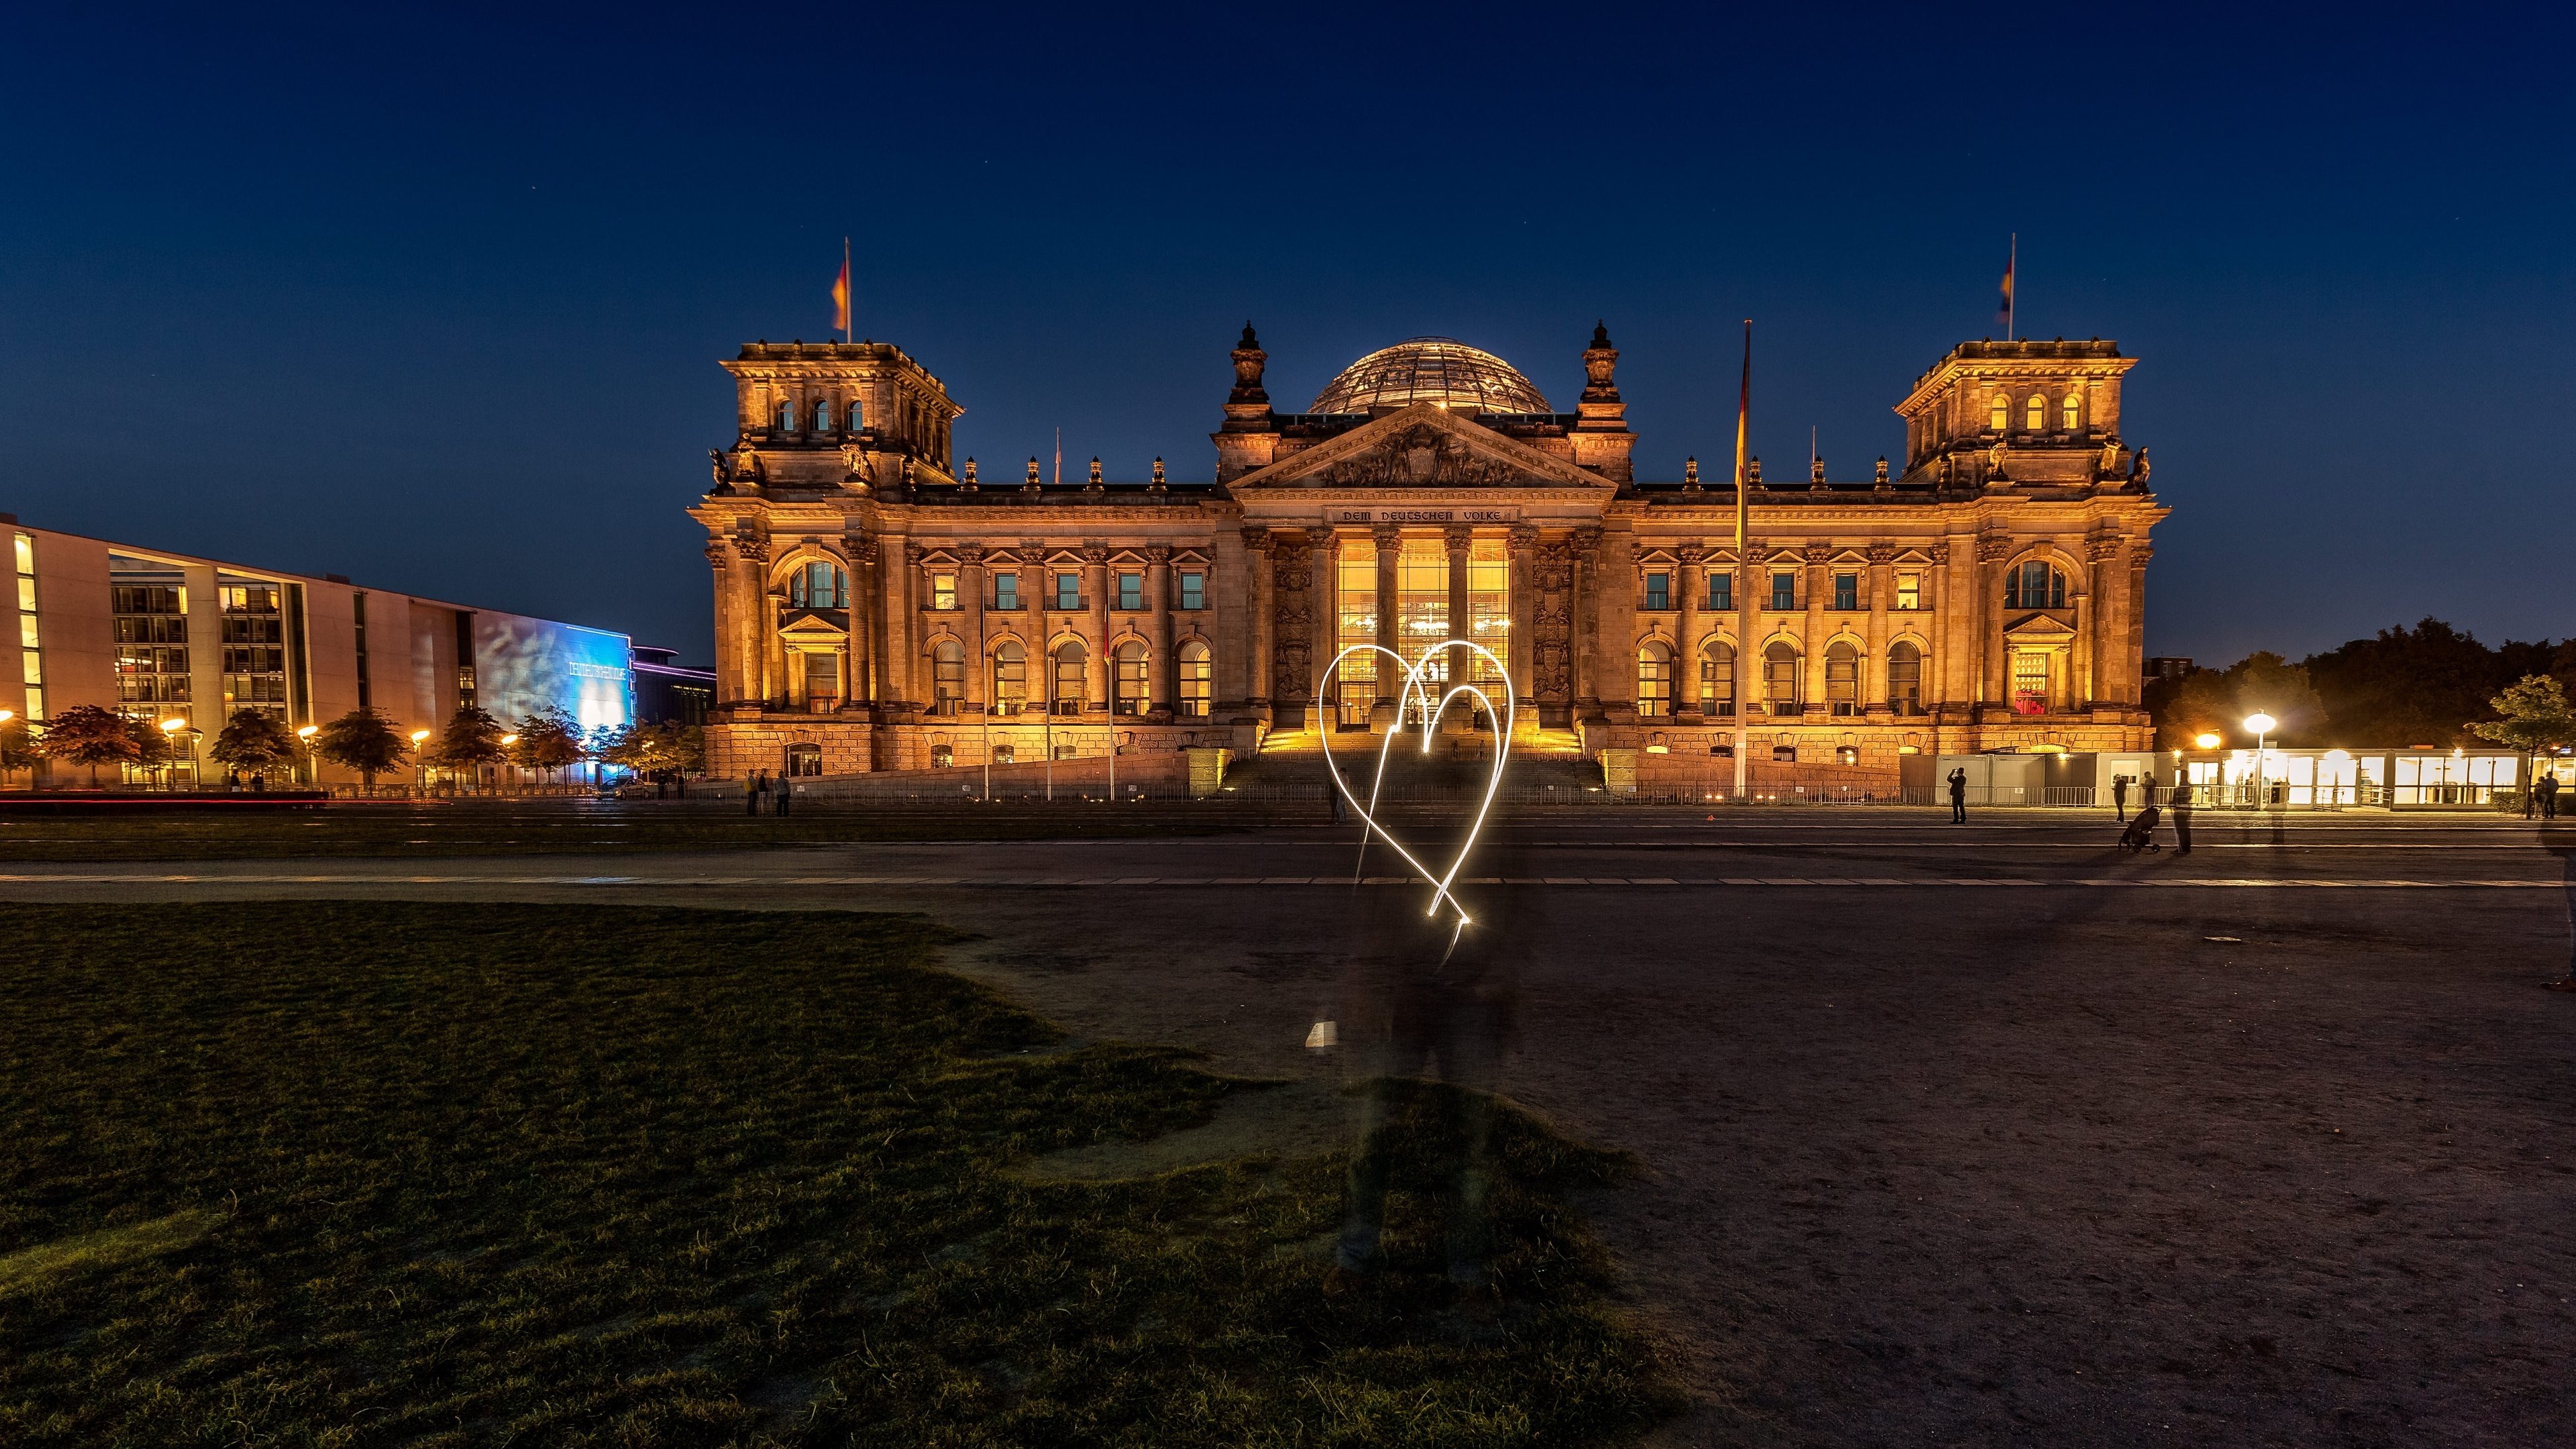 heart, Architecture, Building, Trees, Long exposure, Reichstag, Berlin, Germany, Lightpaint, Blurred, Evening, Lights, Old building, Modern Wallpaper